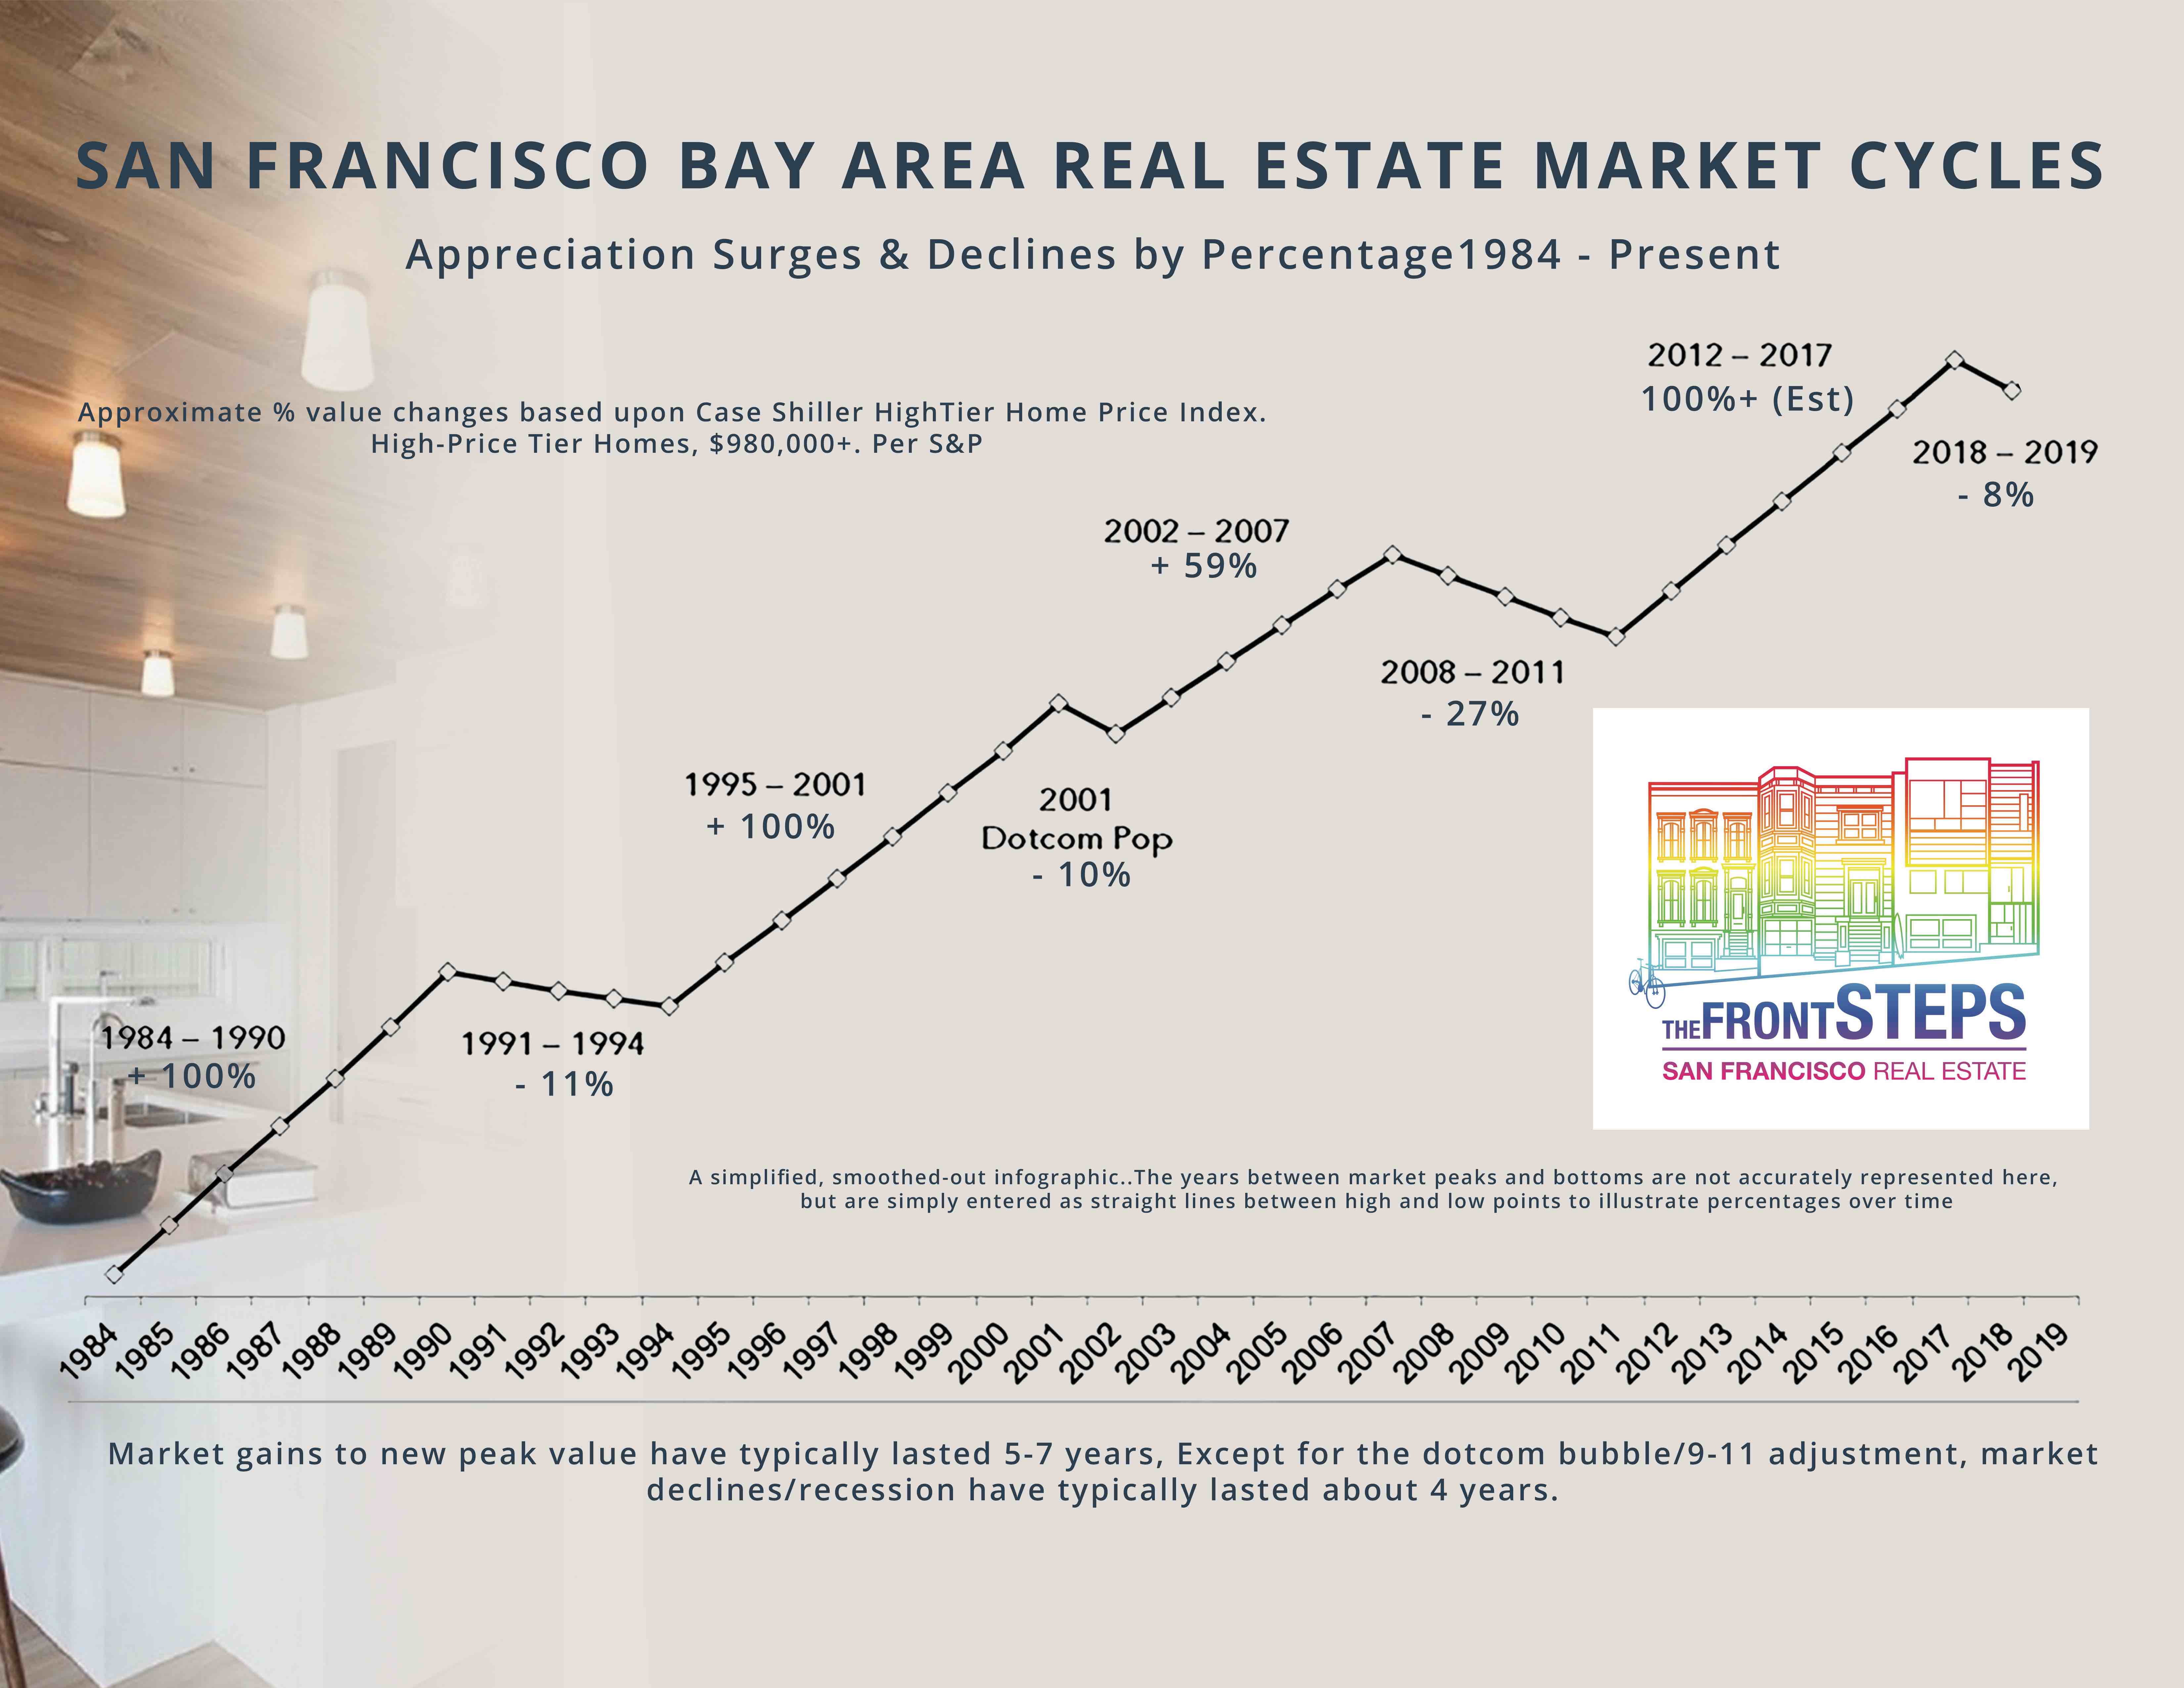 San Francisco Bay Area Real Estate Cycles Since 1984